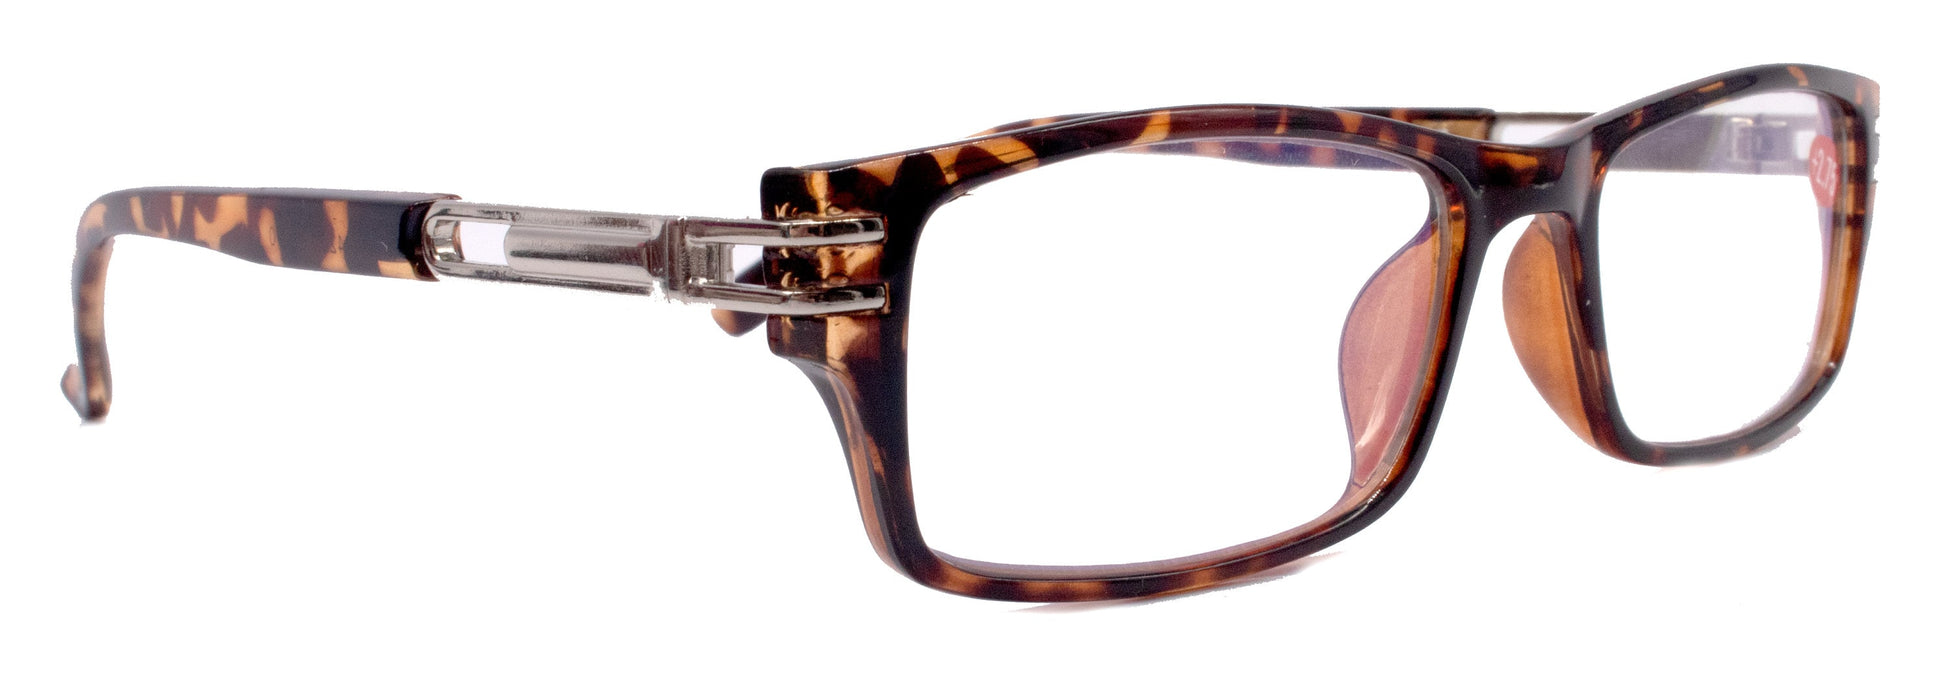 The Hudson, (Premium) Reading Glasses, High End Reading Glass +1.25 to +6 Magnifying (Tortoise Brown) Rectangular Frames. NY Fifth Avenue.